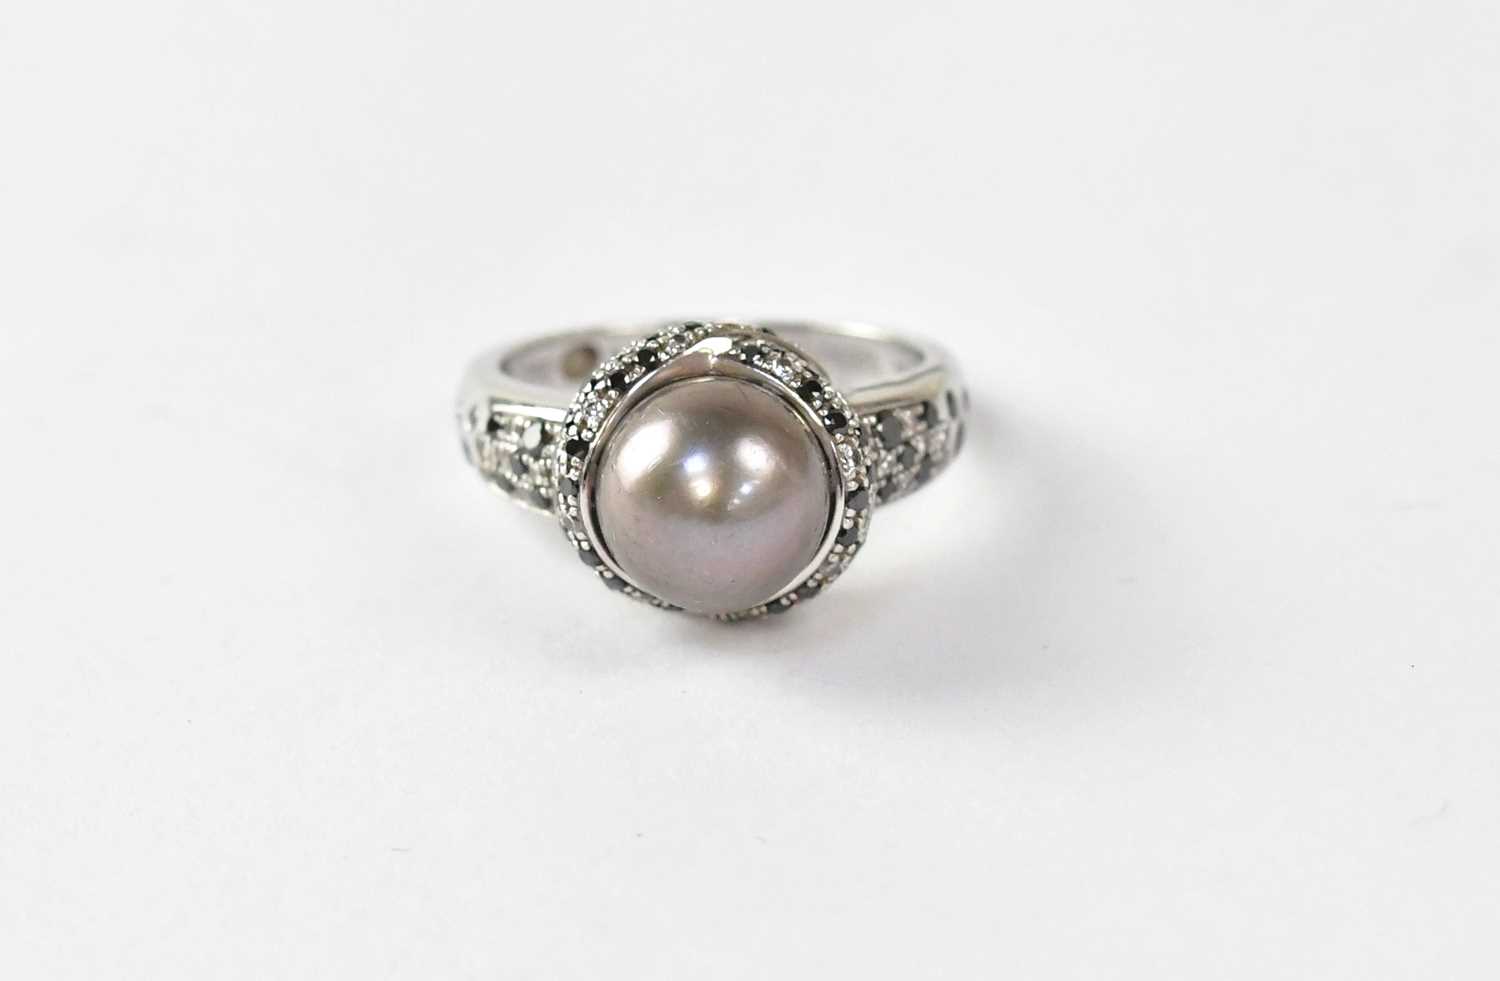 MAUBOUSSIN; an 18ct white gold 'Perle Caviar Mon Amour' ring set with a grey cultured pearl,